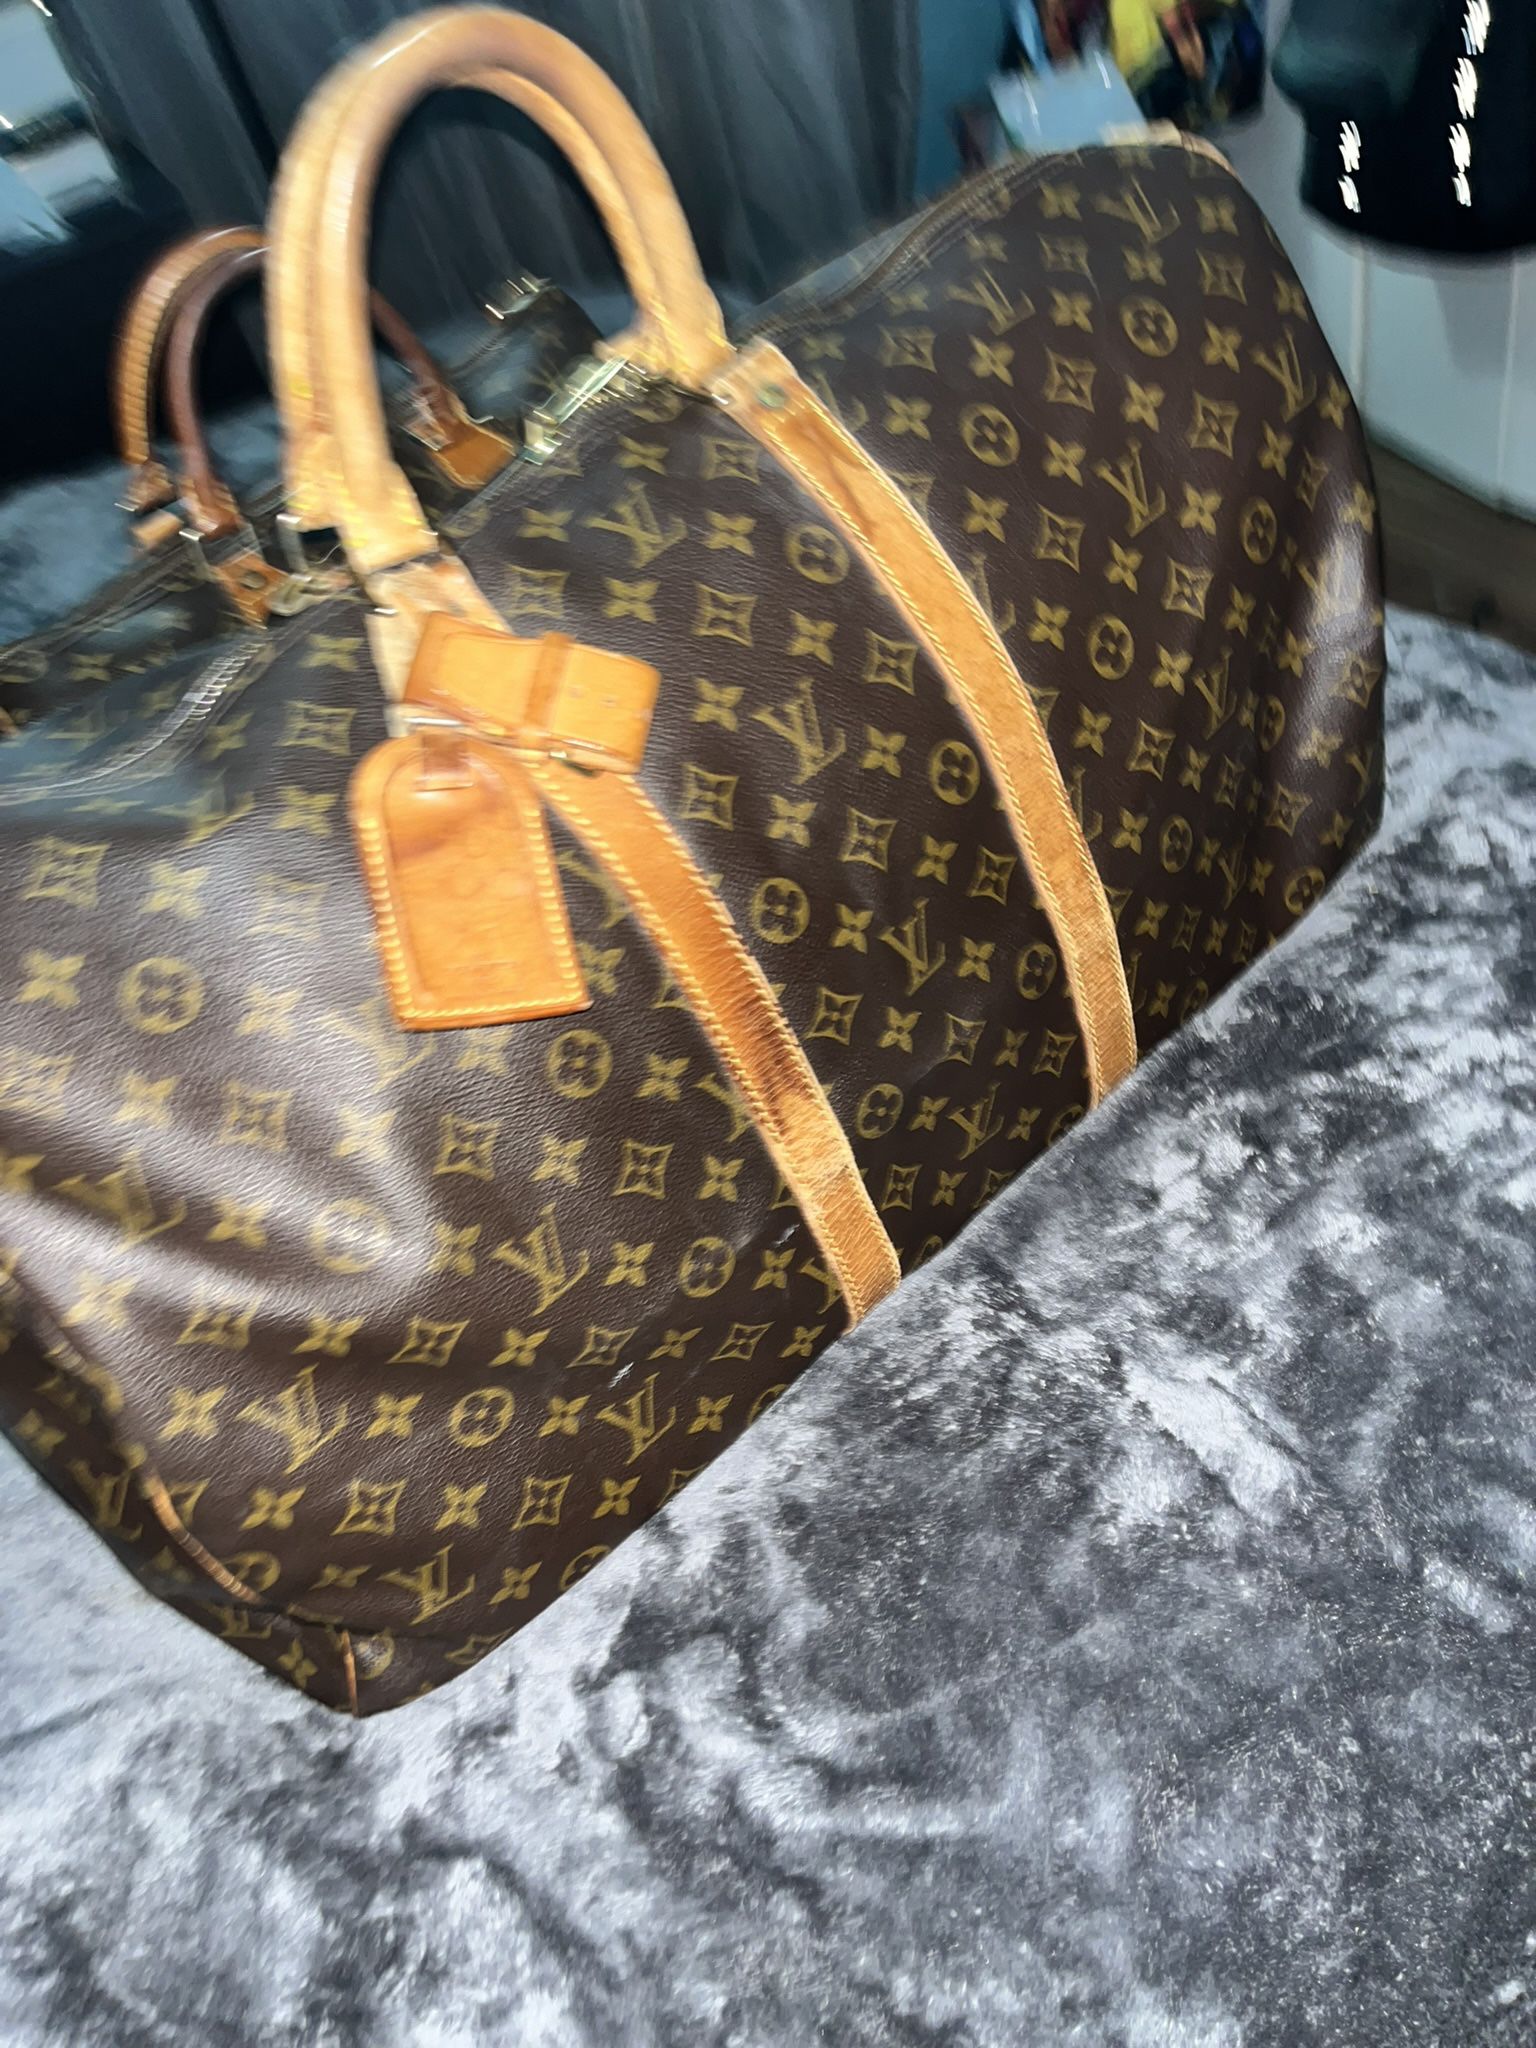 LV Rainbow Duffle Bag for Sale in Brooklyn, NY - OfferUp